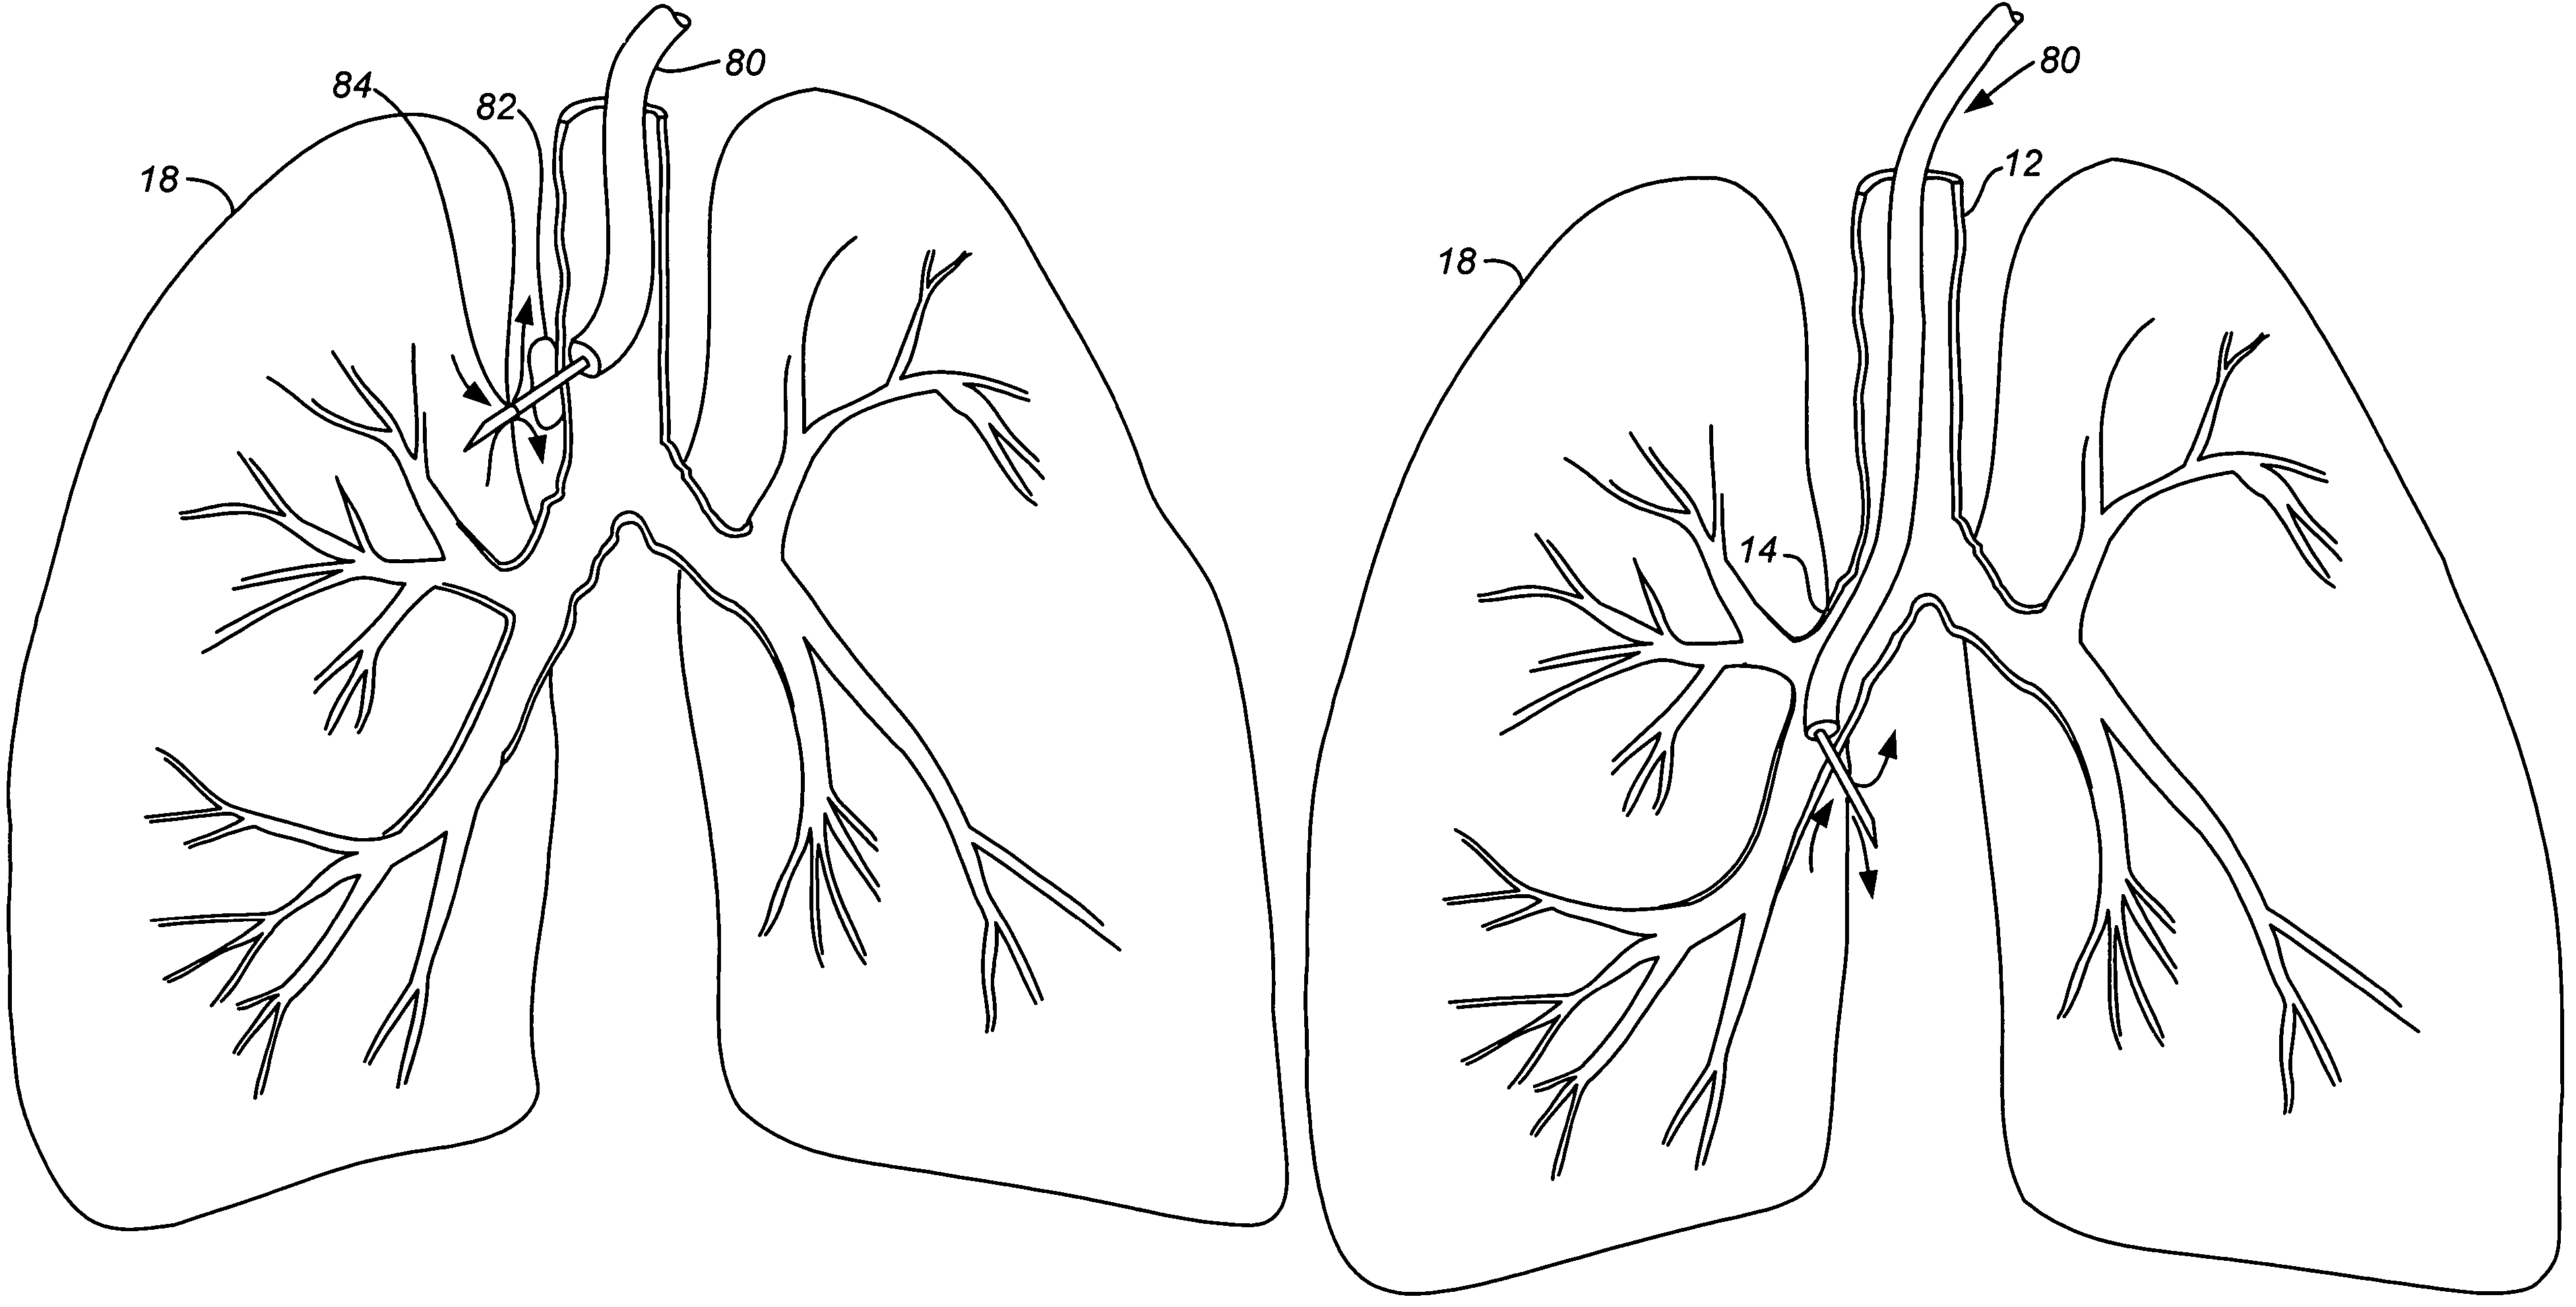 Lung device with sealing features